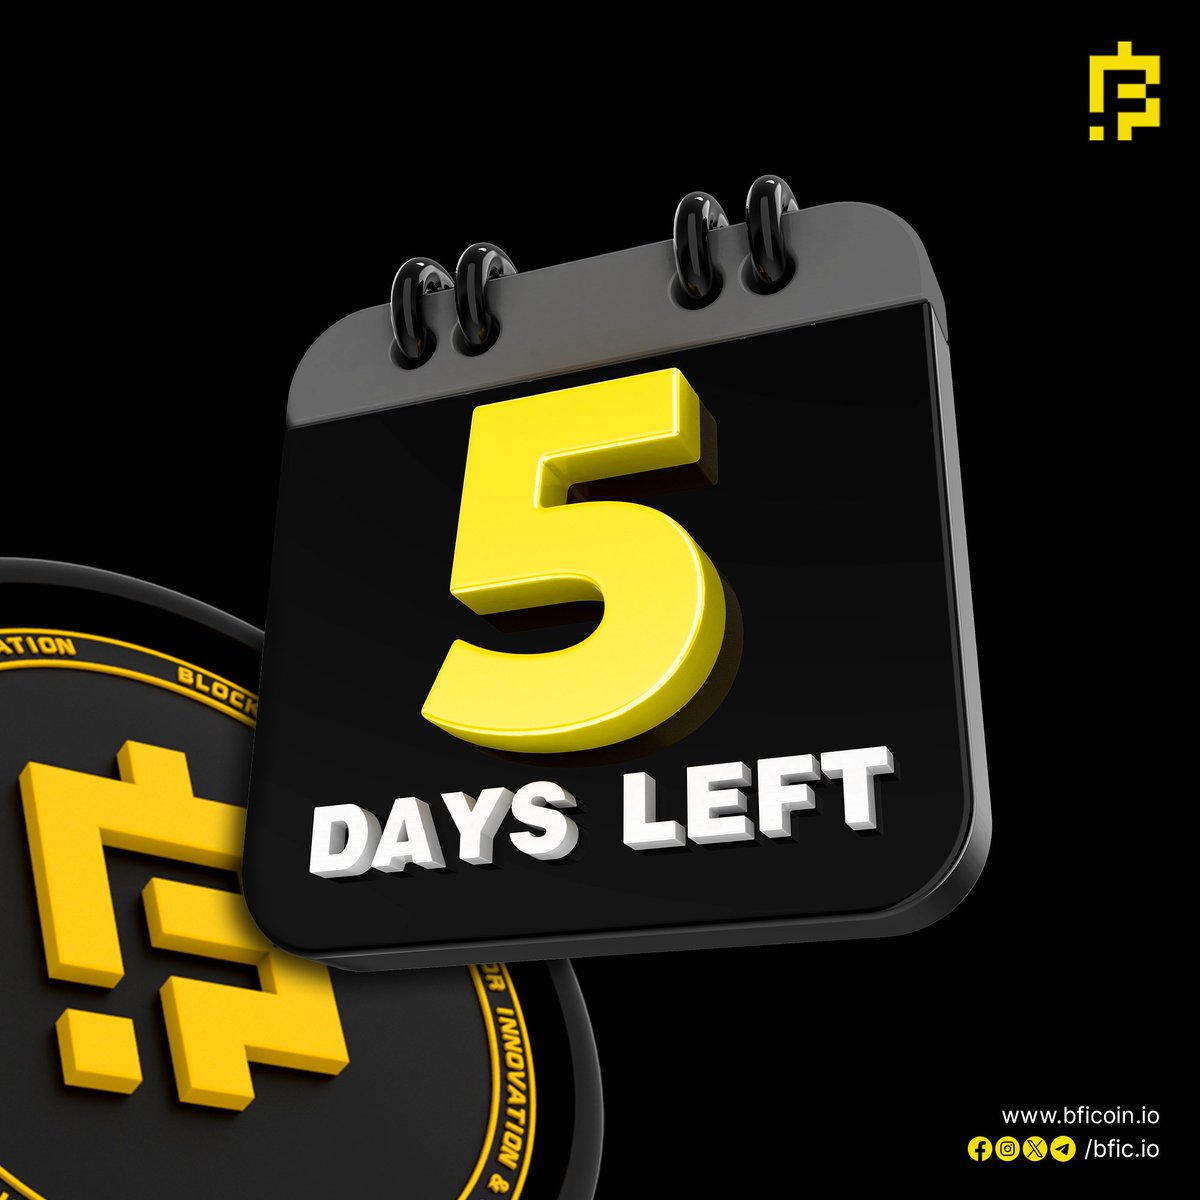 Tick-tock, tick-tock! Only 5 days remaining until April 15th, when the crypto universe will experience a groundbreaking shift! 

Don't miss out on being part of this historic moment! ⏰🌐
.
.
.
#5daysleft #InnovationFactory #BFIC #BULLRUN #BFICToTheMoon #BFIC15thApril…